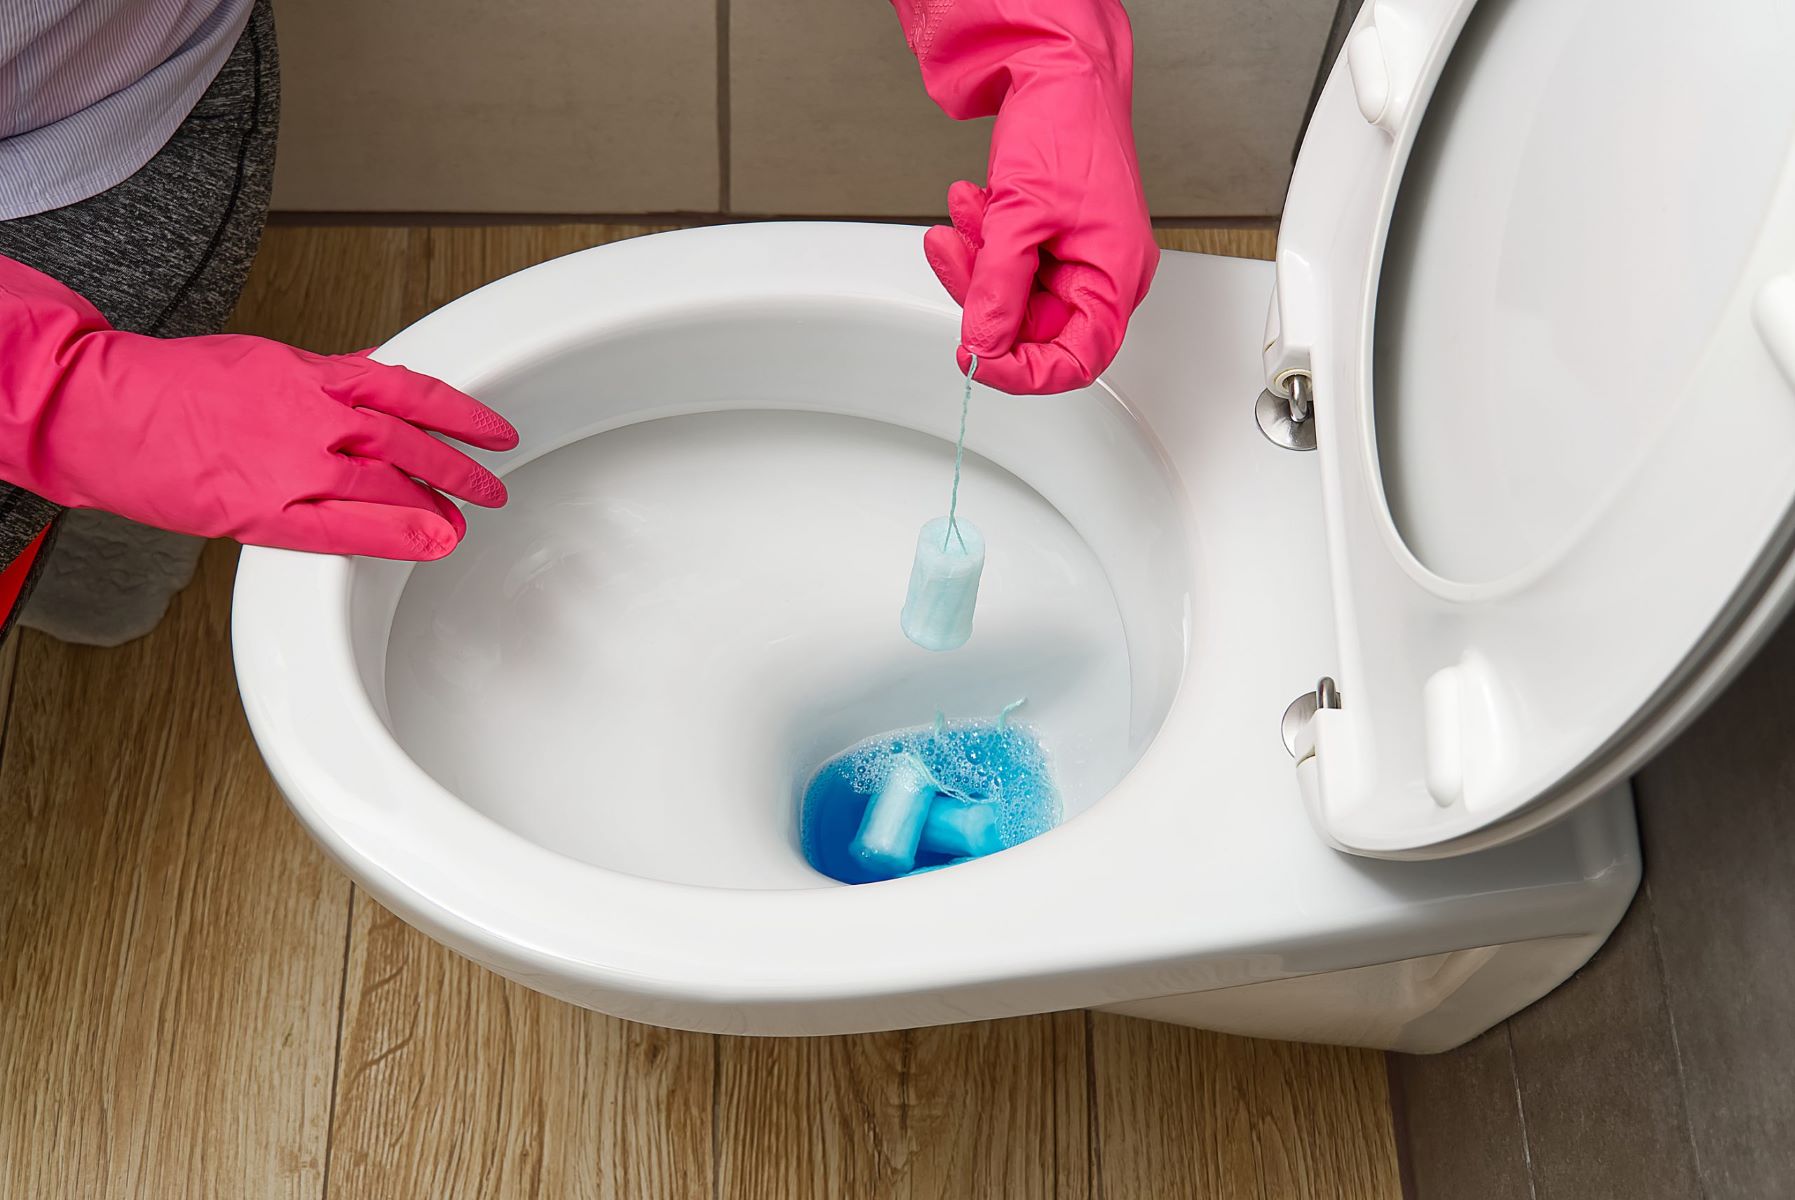 Revolutionary Tips To Fix Weak Toilet Flushes – Say Goodbye To Water Filling Up!